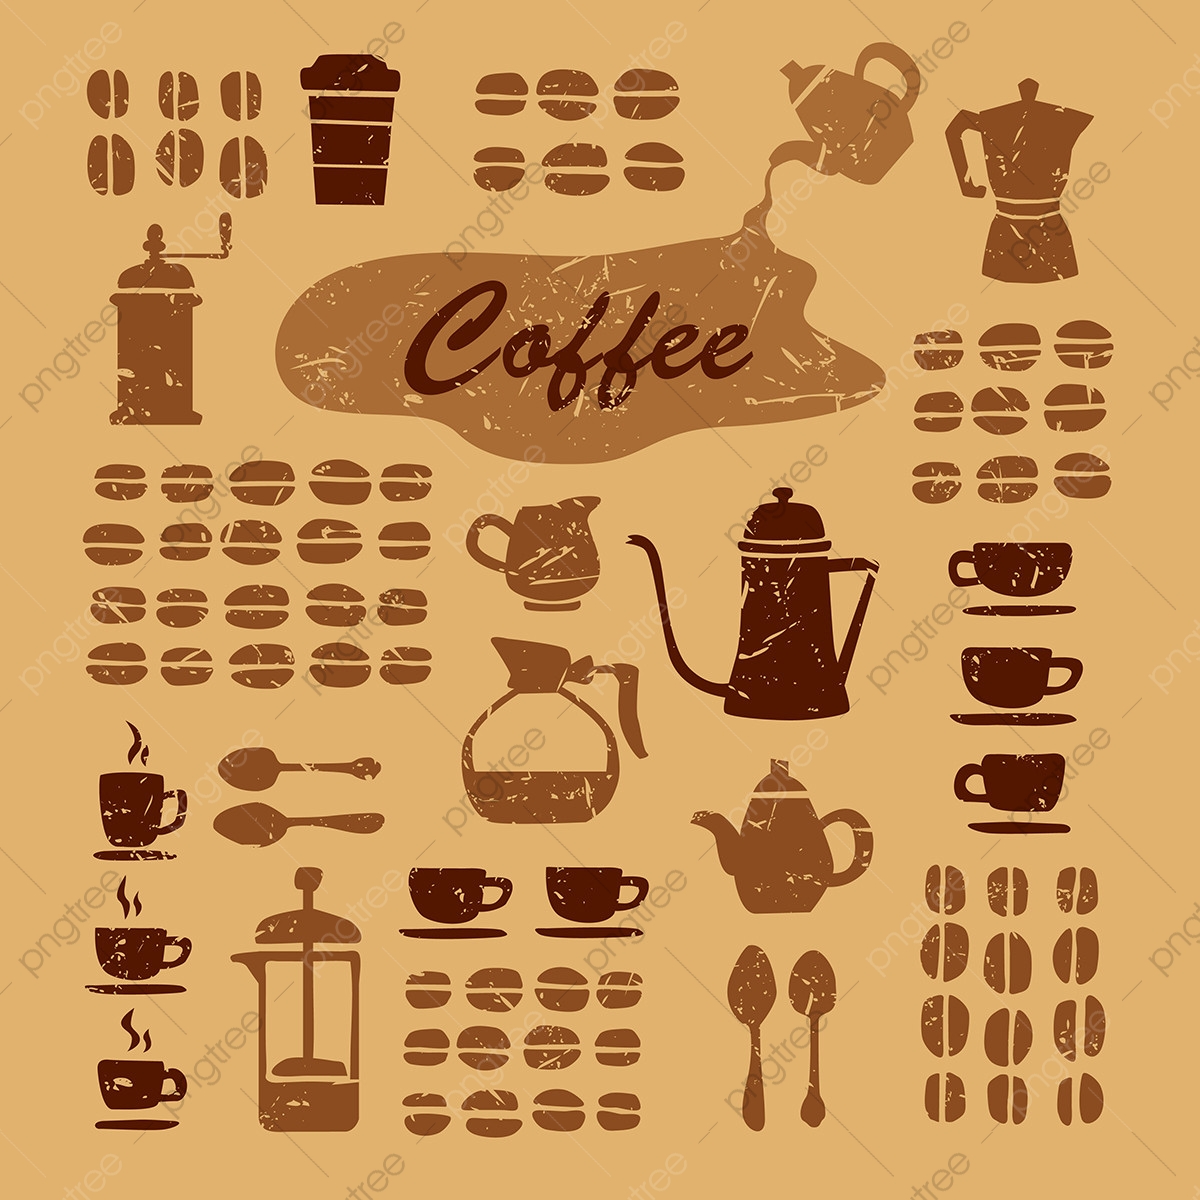 Download Coffee Silhouette Vector at Vectorified.com | Collection ...